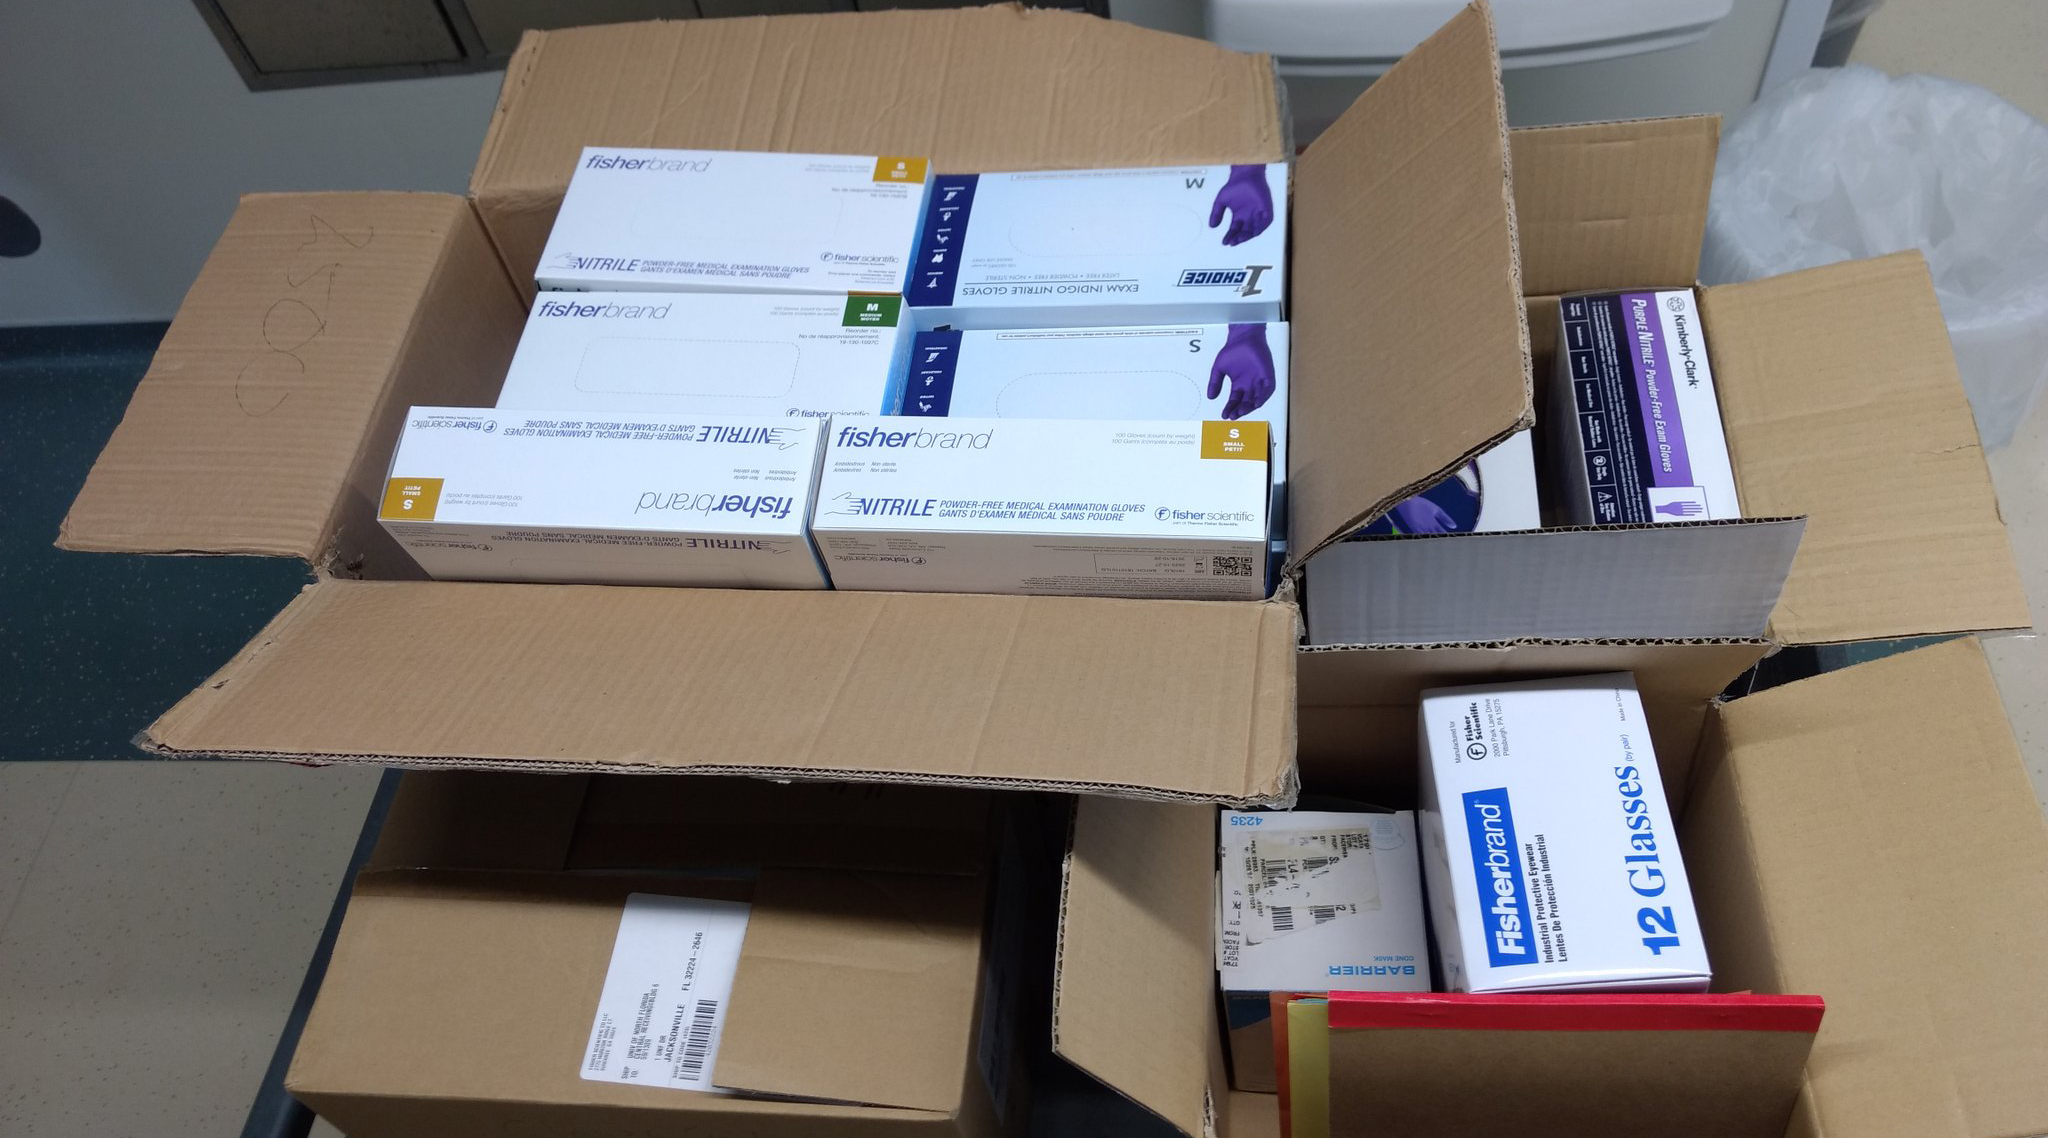 box of donated medial supplies